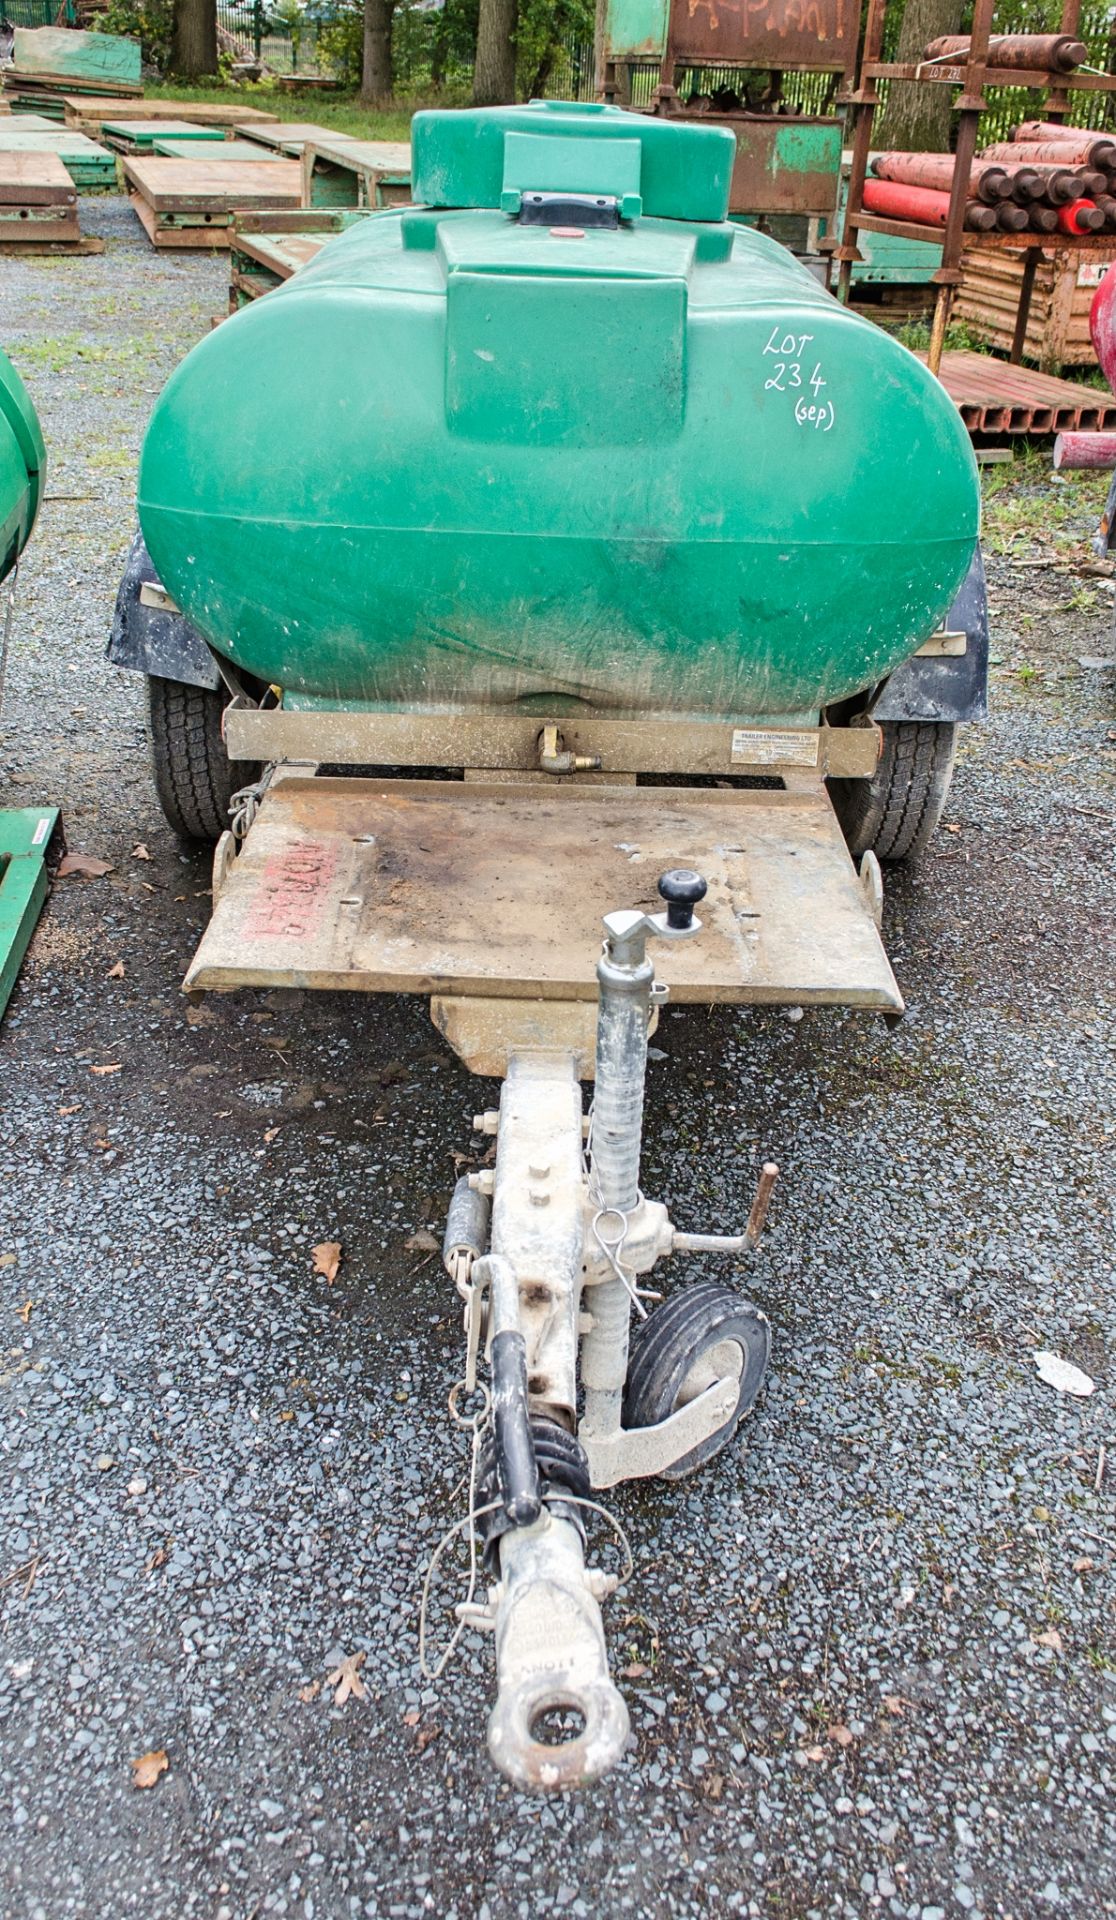 Trailer Engineering fast tow water bowser A1079349 - Image 3 of 4